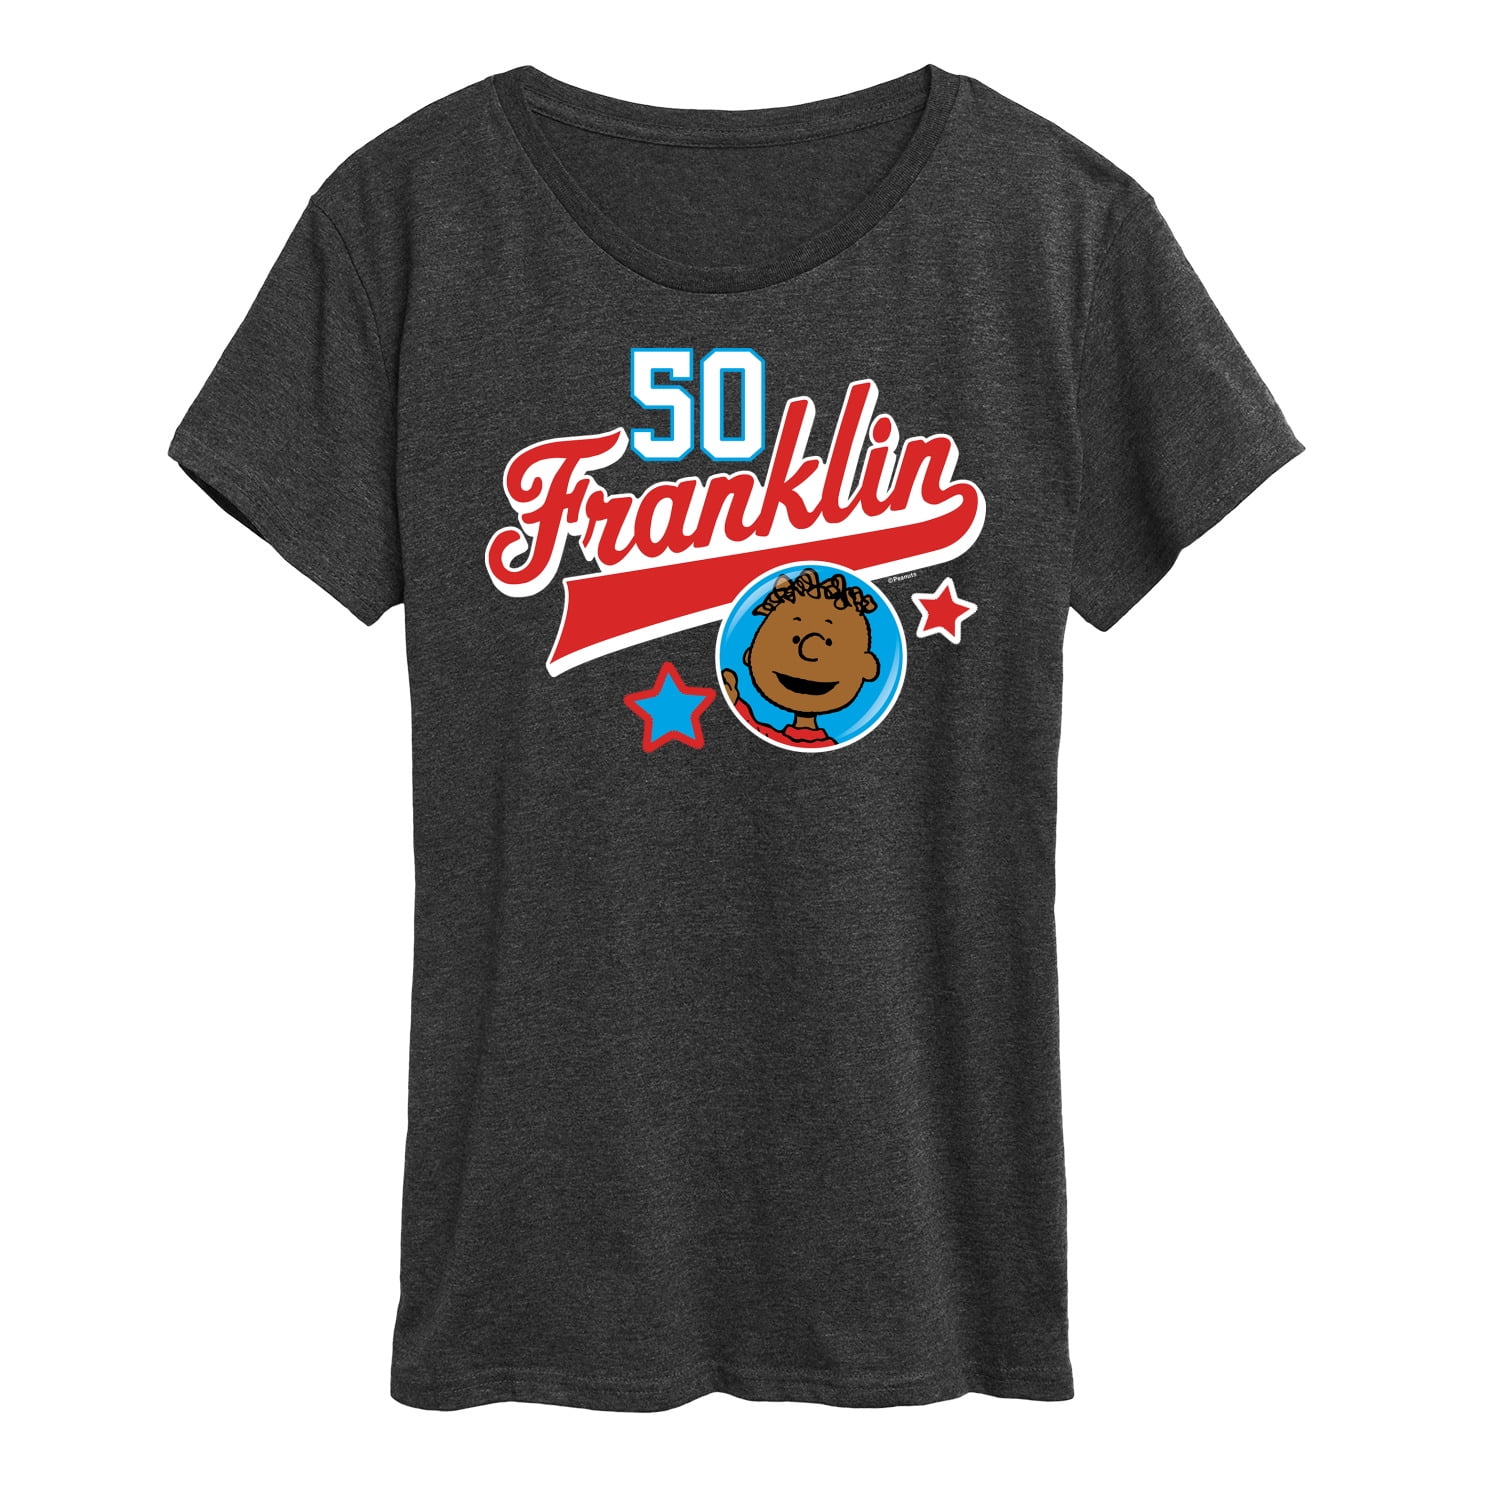 Peanuts - Franklin Athletic 50 - Women's Short Sleeve Graphic T-Shirt ...